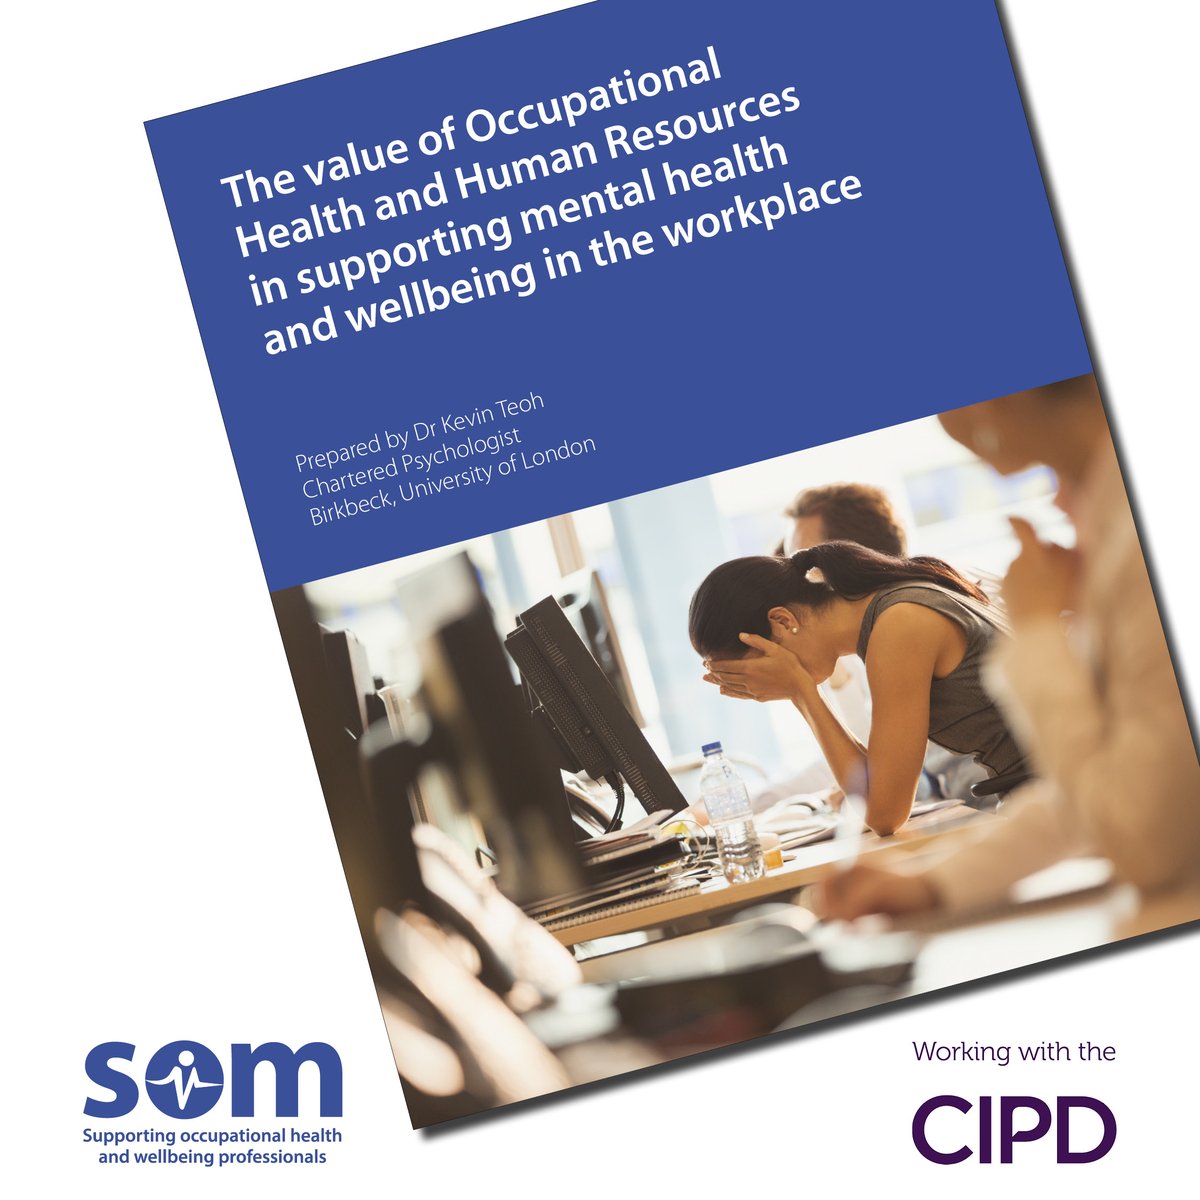 I was delighted to get a sneak peak at the new report by @SOMNews @CIPD @kevinteohrh and write this blog about how we can support organisations to move from evidence to practice via good knowledge exchange practices: som.org.uk/promoting-evid…